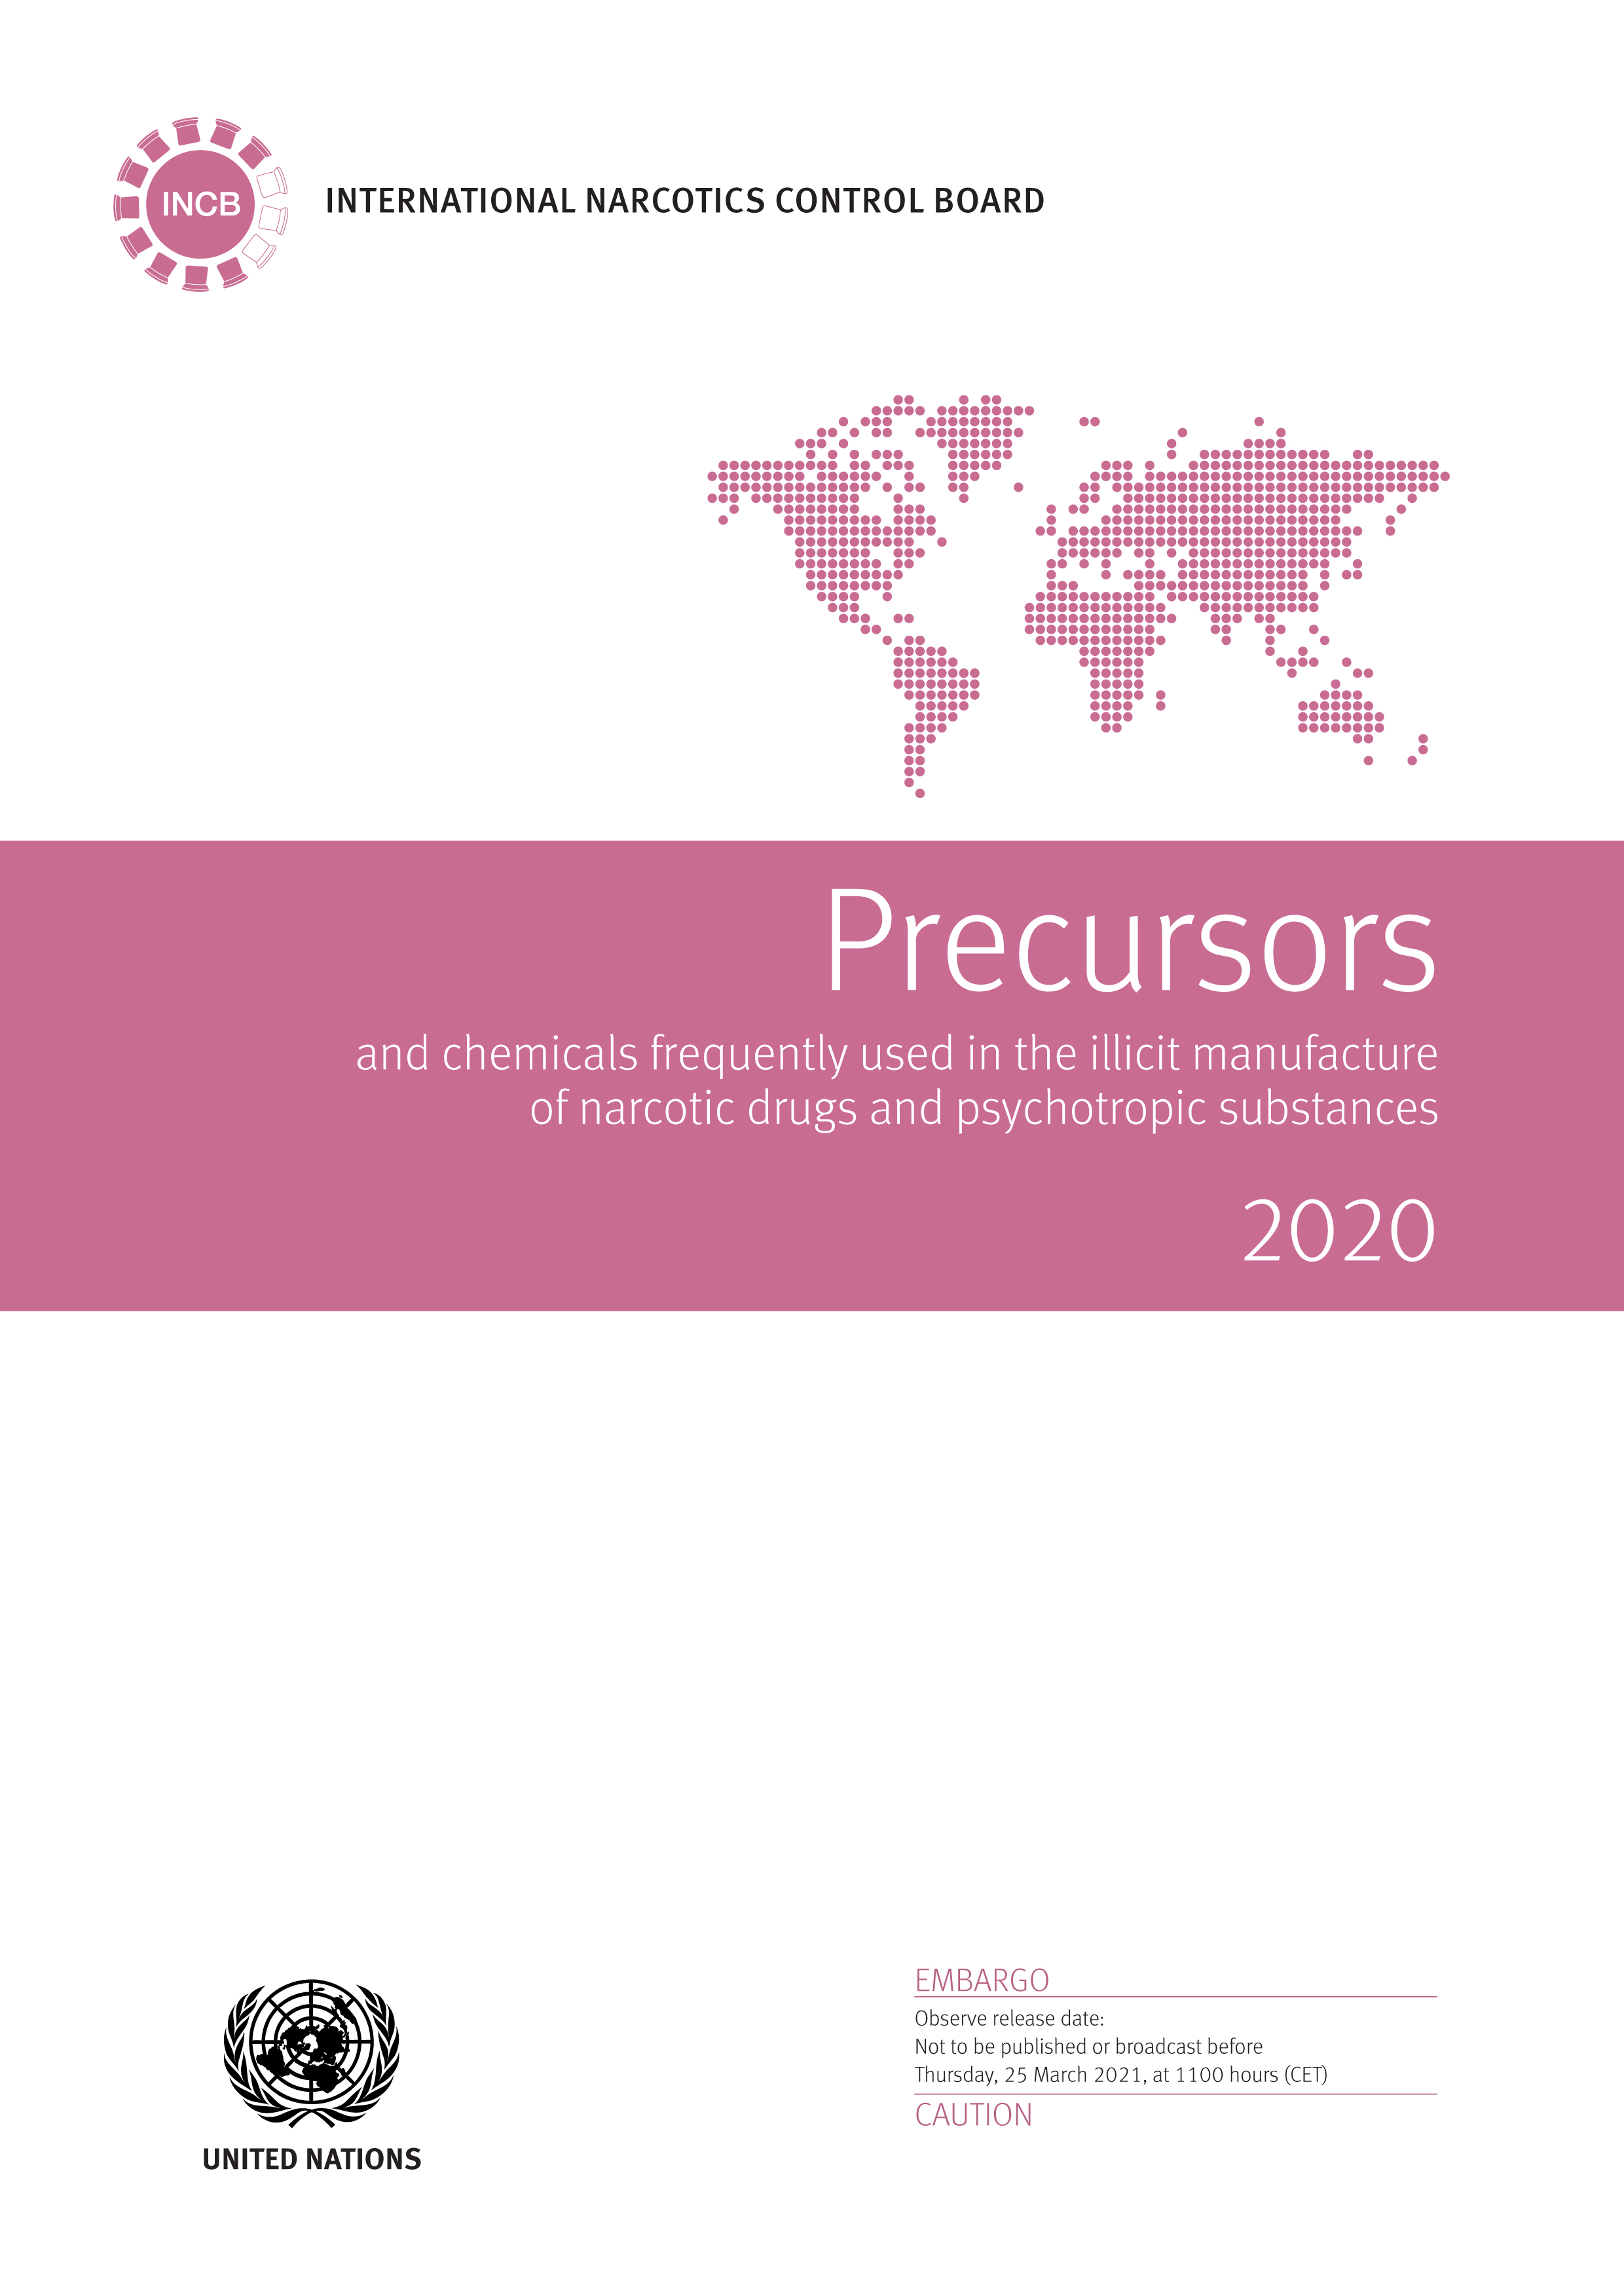 image of Treaty provisions for the control of substances frequently used in the illicit manufacture of narcotic drugs and psychotropic substances